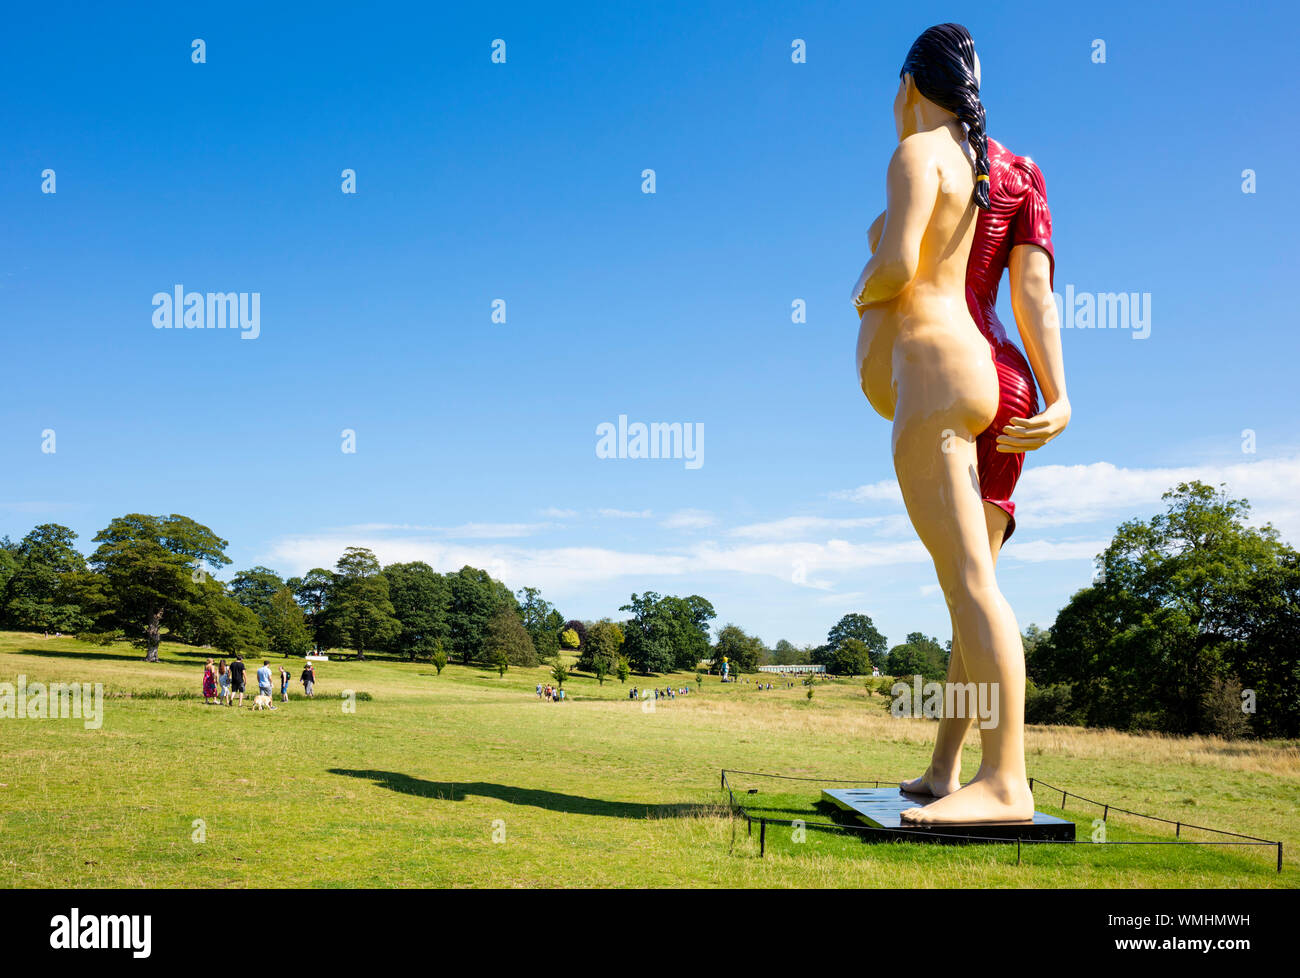 Yorkshire Sculpture Park Sculpture of the Virgin Woman by Damien Hirst at the Yorkshire sculpture park YSP Yorkshire England uk gb Europe Stock Photo